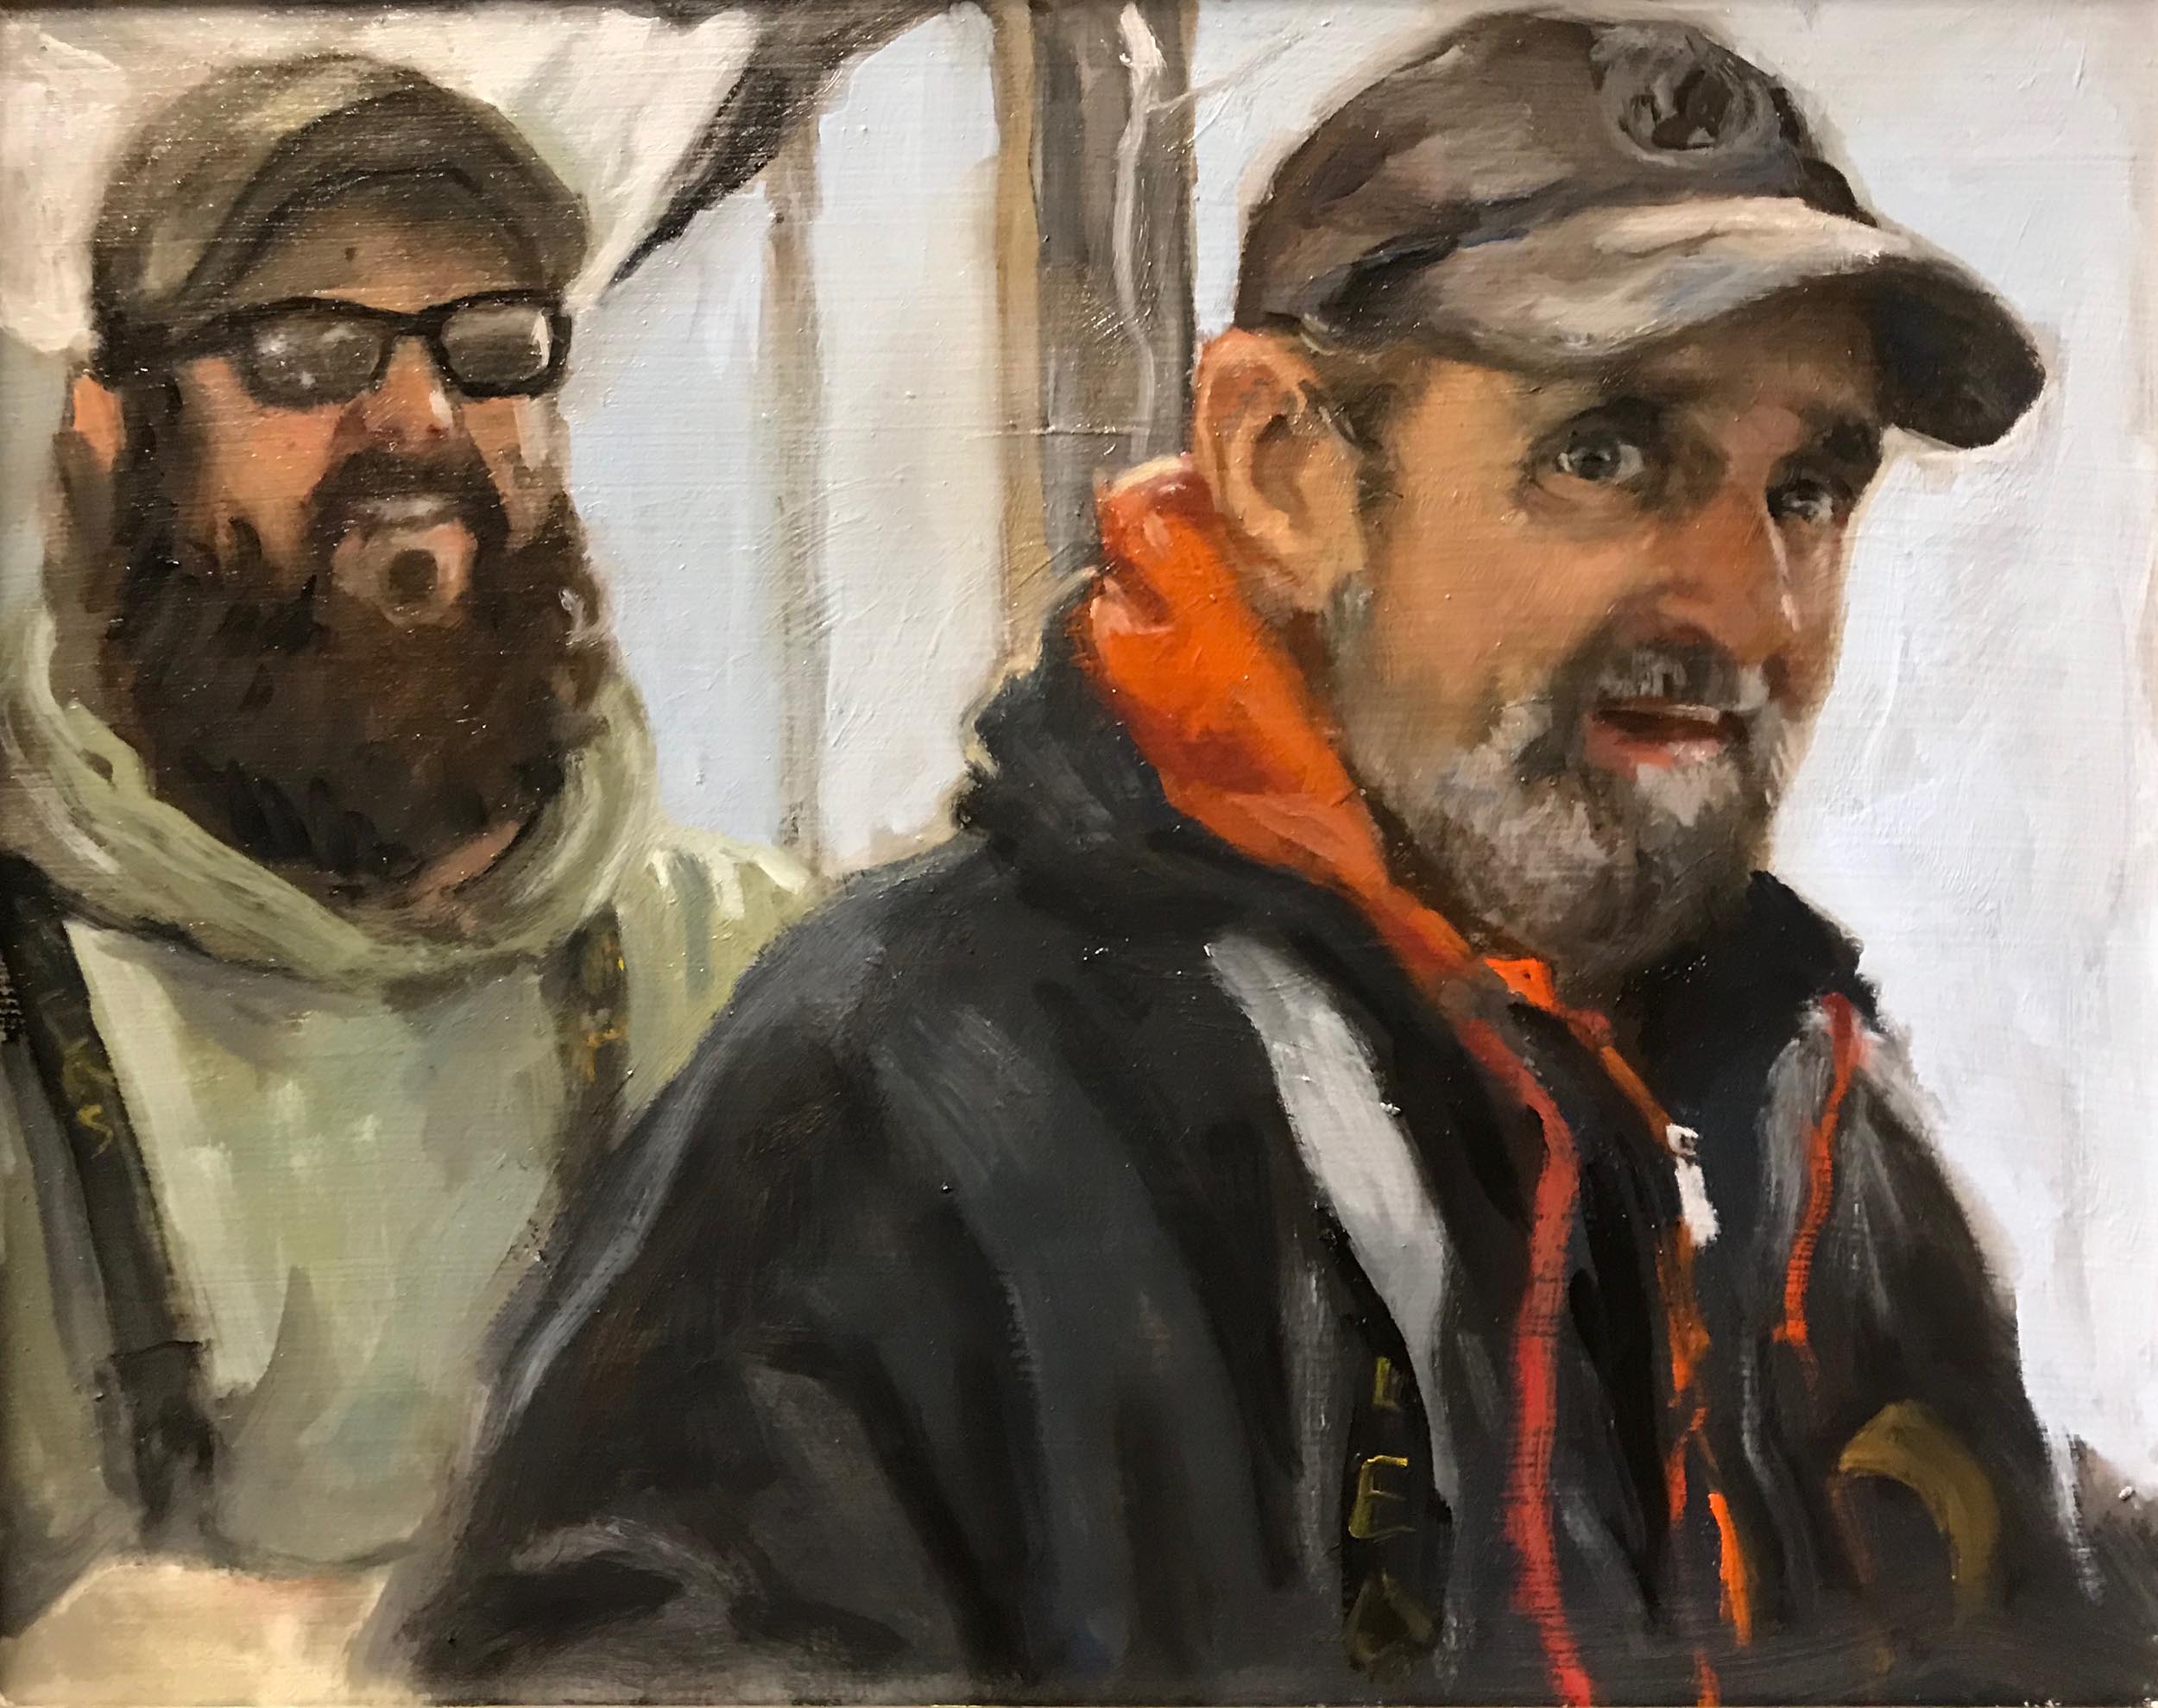 The Watermen, 12" x 16". Commission.